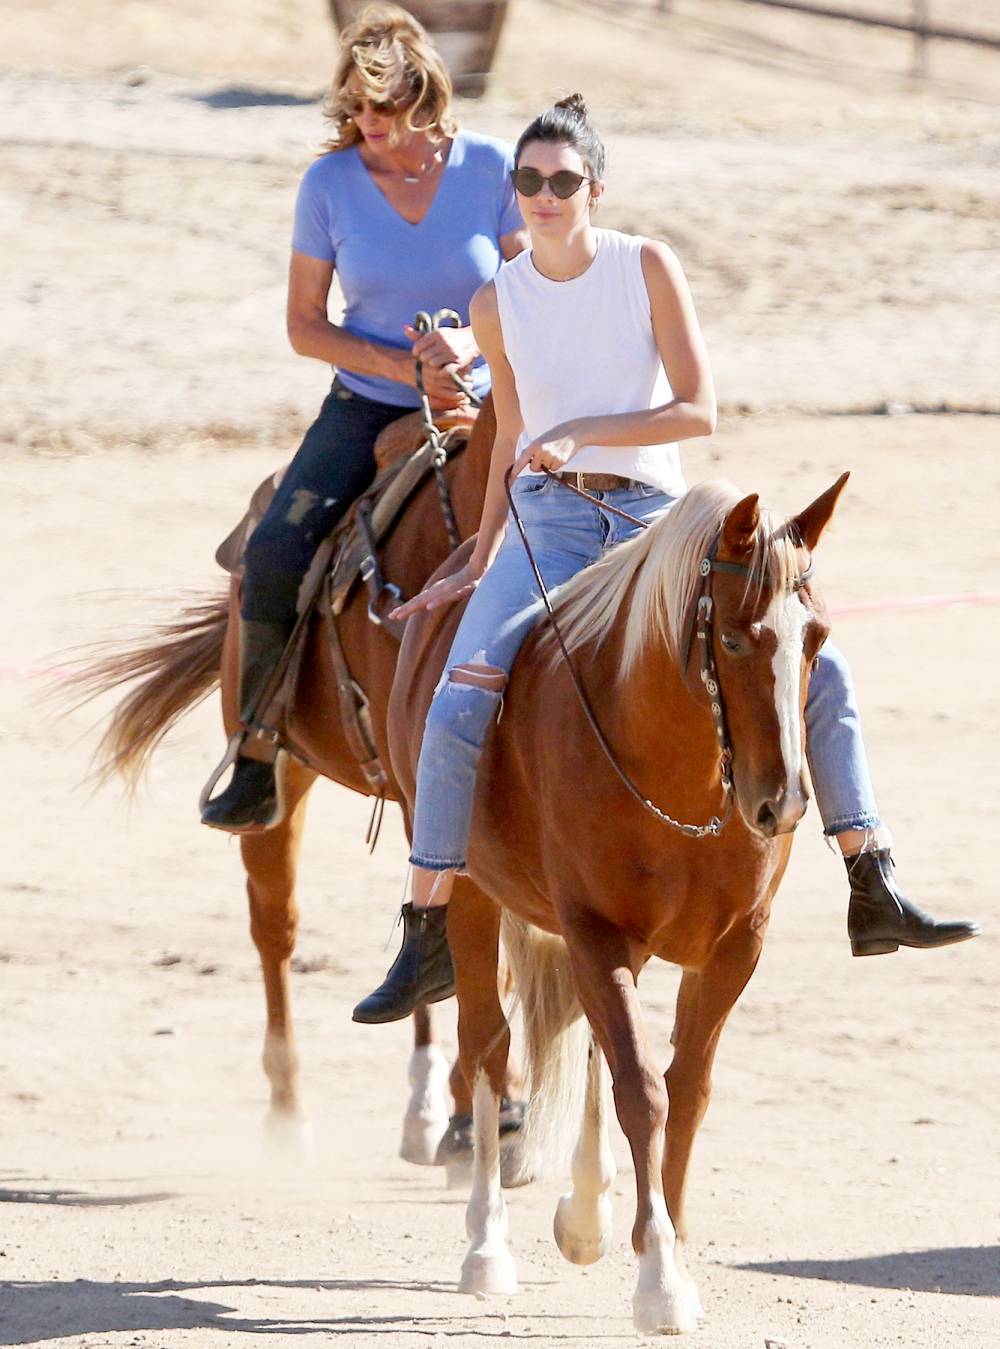 Caitlyn Jenner and Kendall Jenner meet up to ride horses during filming of "Keeping Up with the Kardashians," on October 21, 2016.